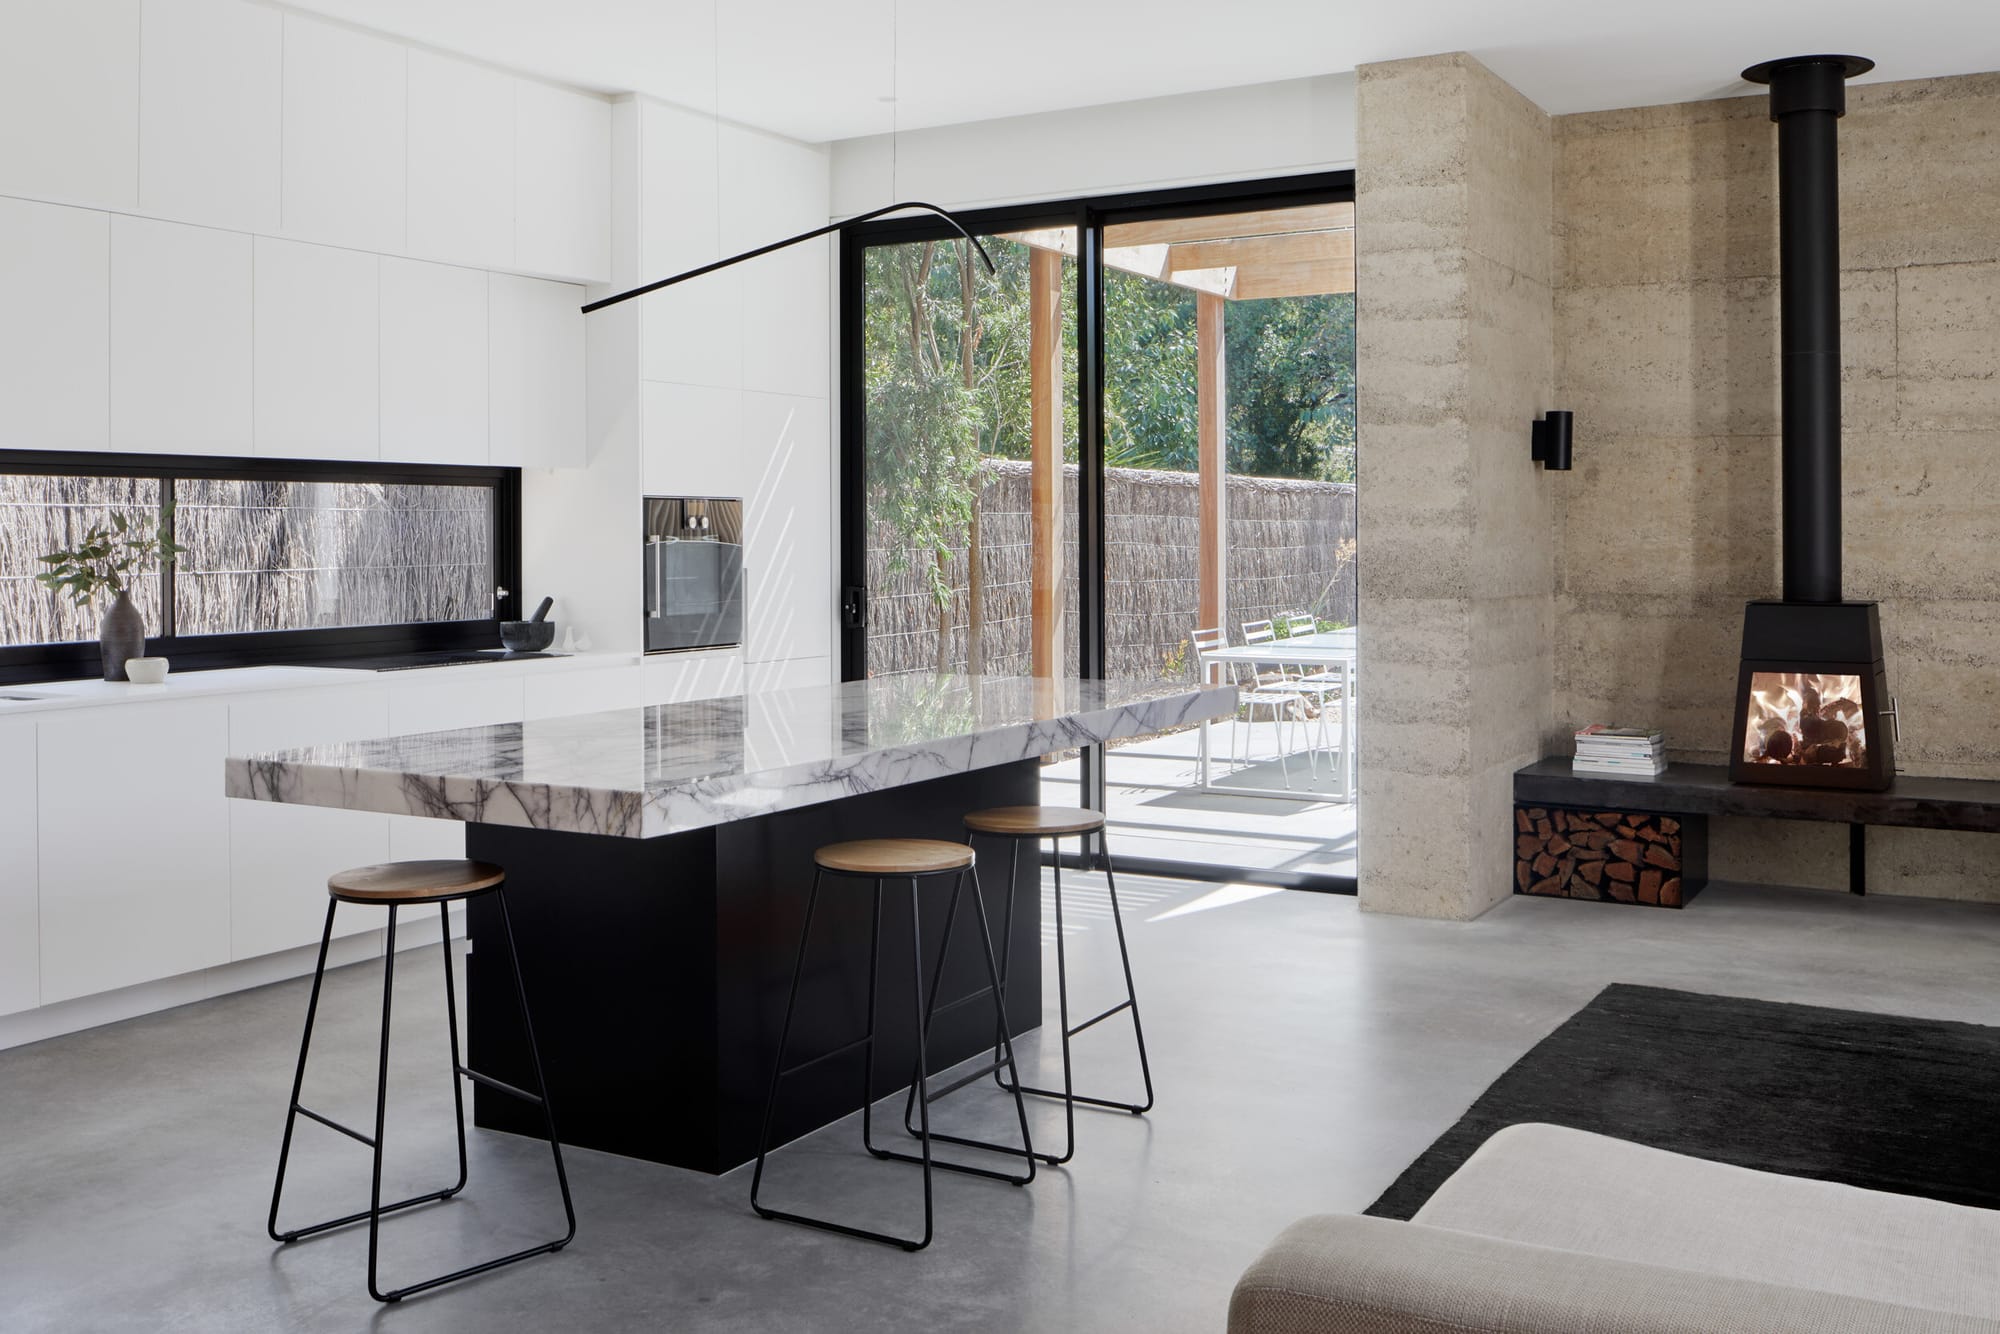 Laurel Grove by Kirsten Johnstone Architecture. Photography by Tatjana Plitt. Open plan living and kitchen space with concrete floors and rammed earth wall. Black and marble island benchtop. Black fireplace.